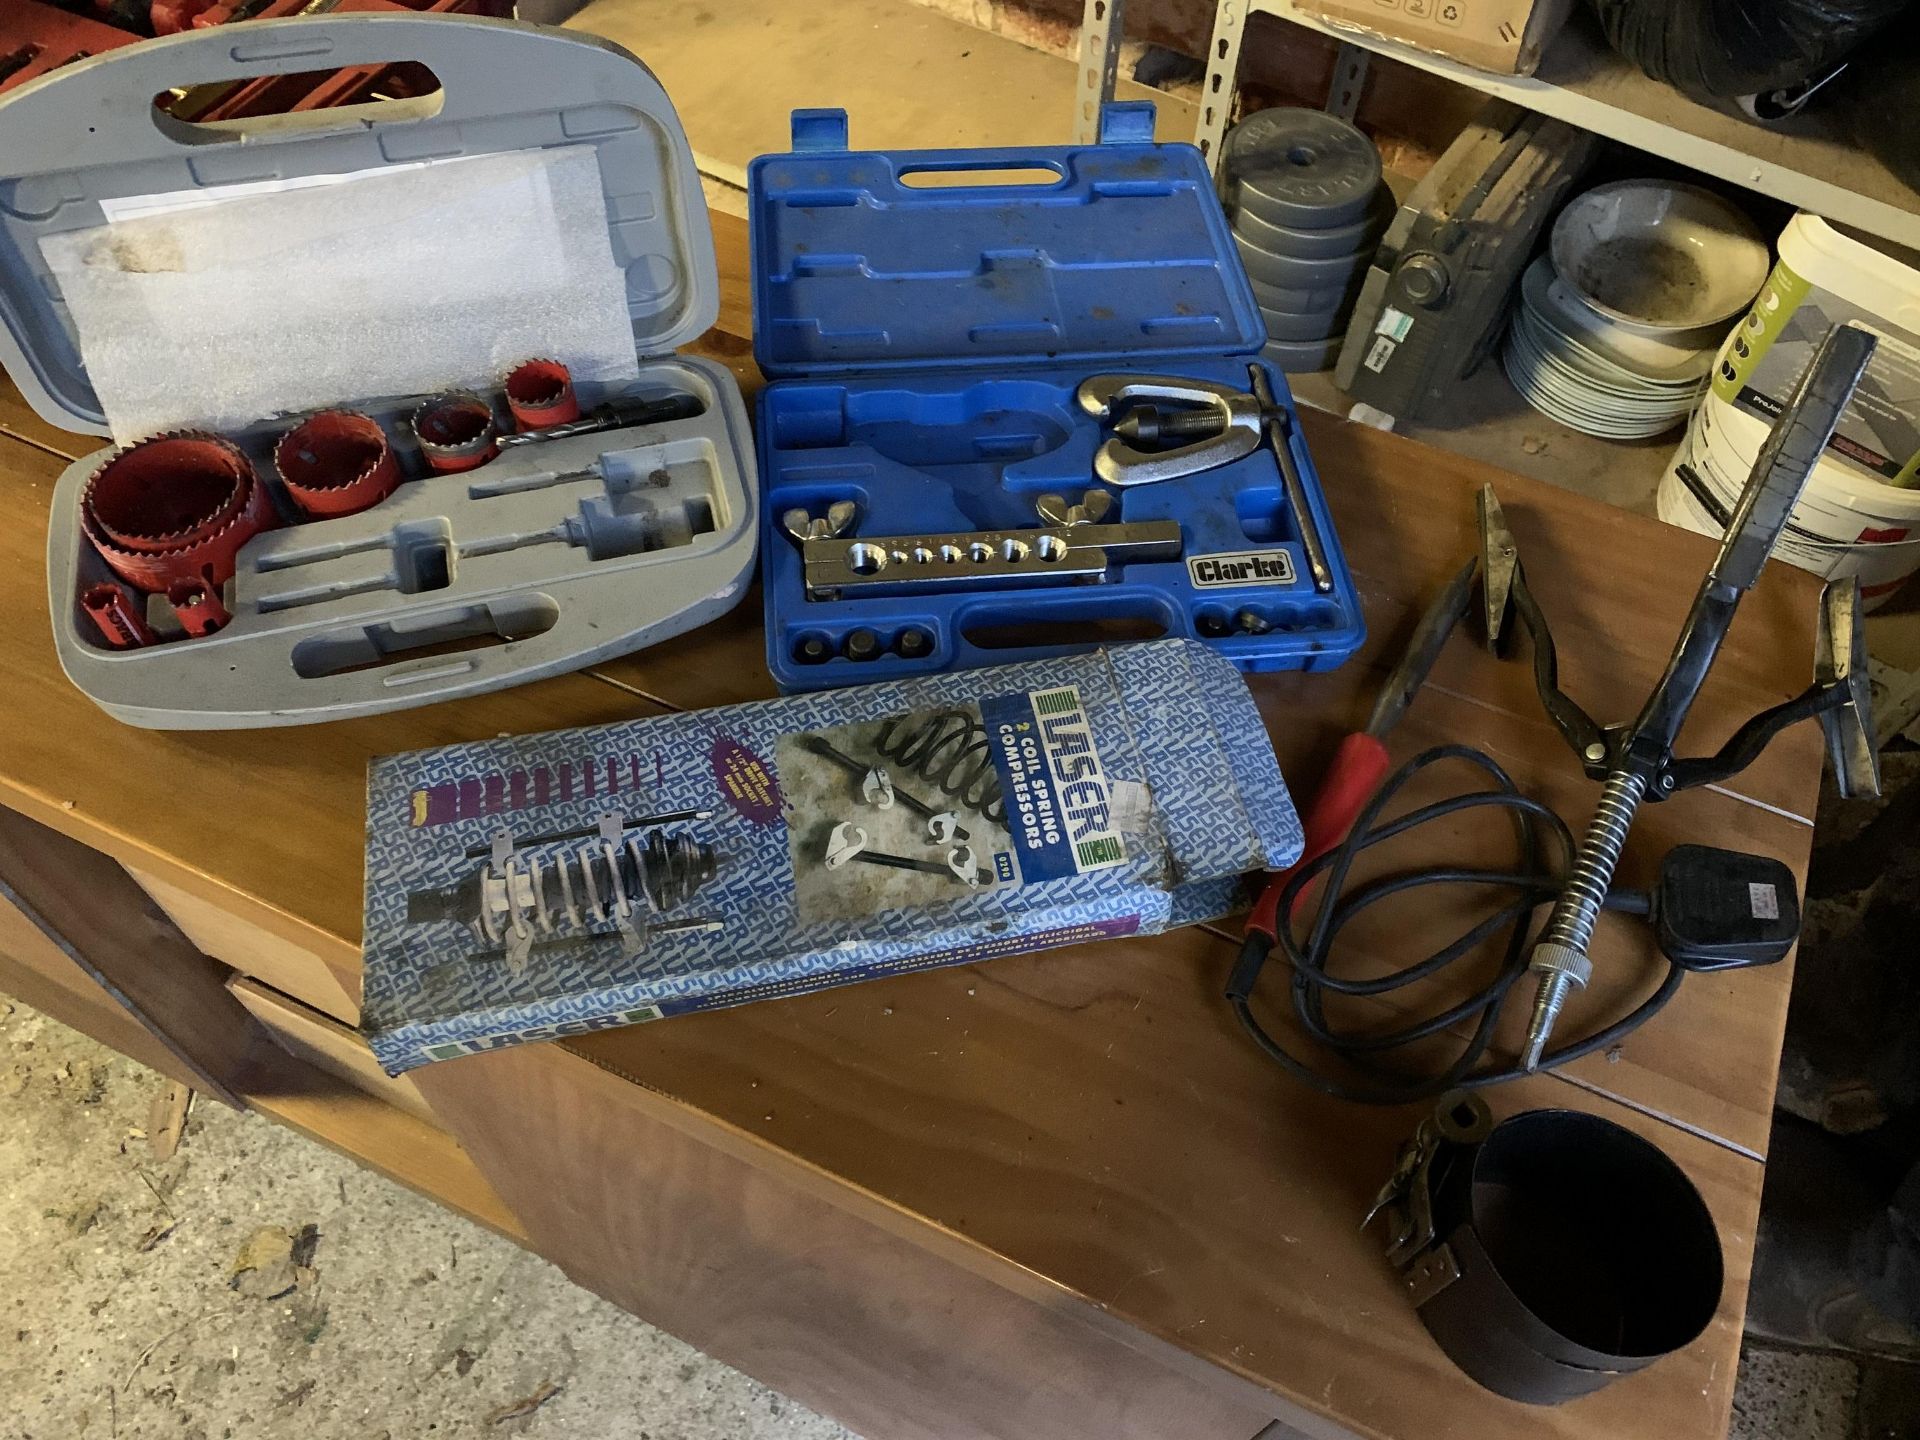 Various garage tools including flaring kit, coil spring compressors, holesaws, honing tool, piston